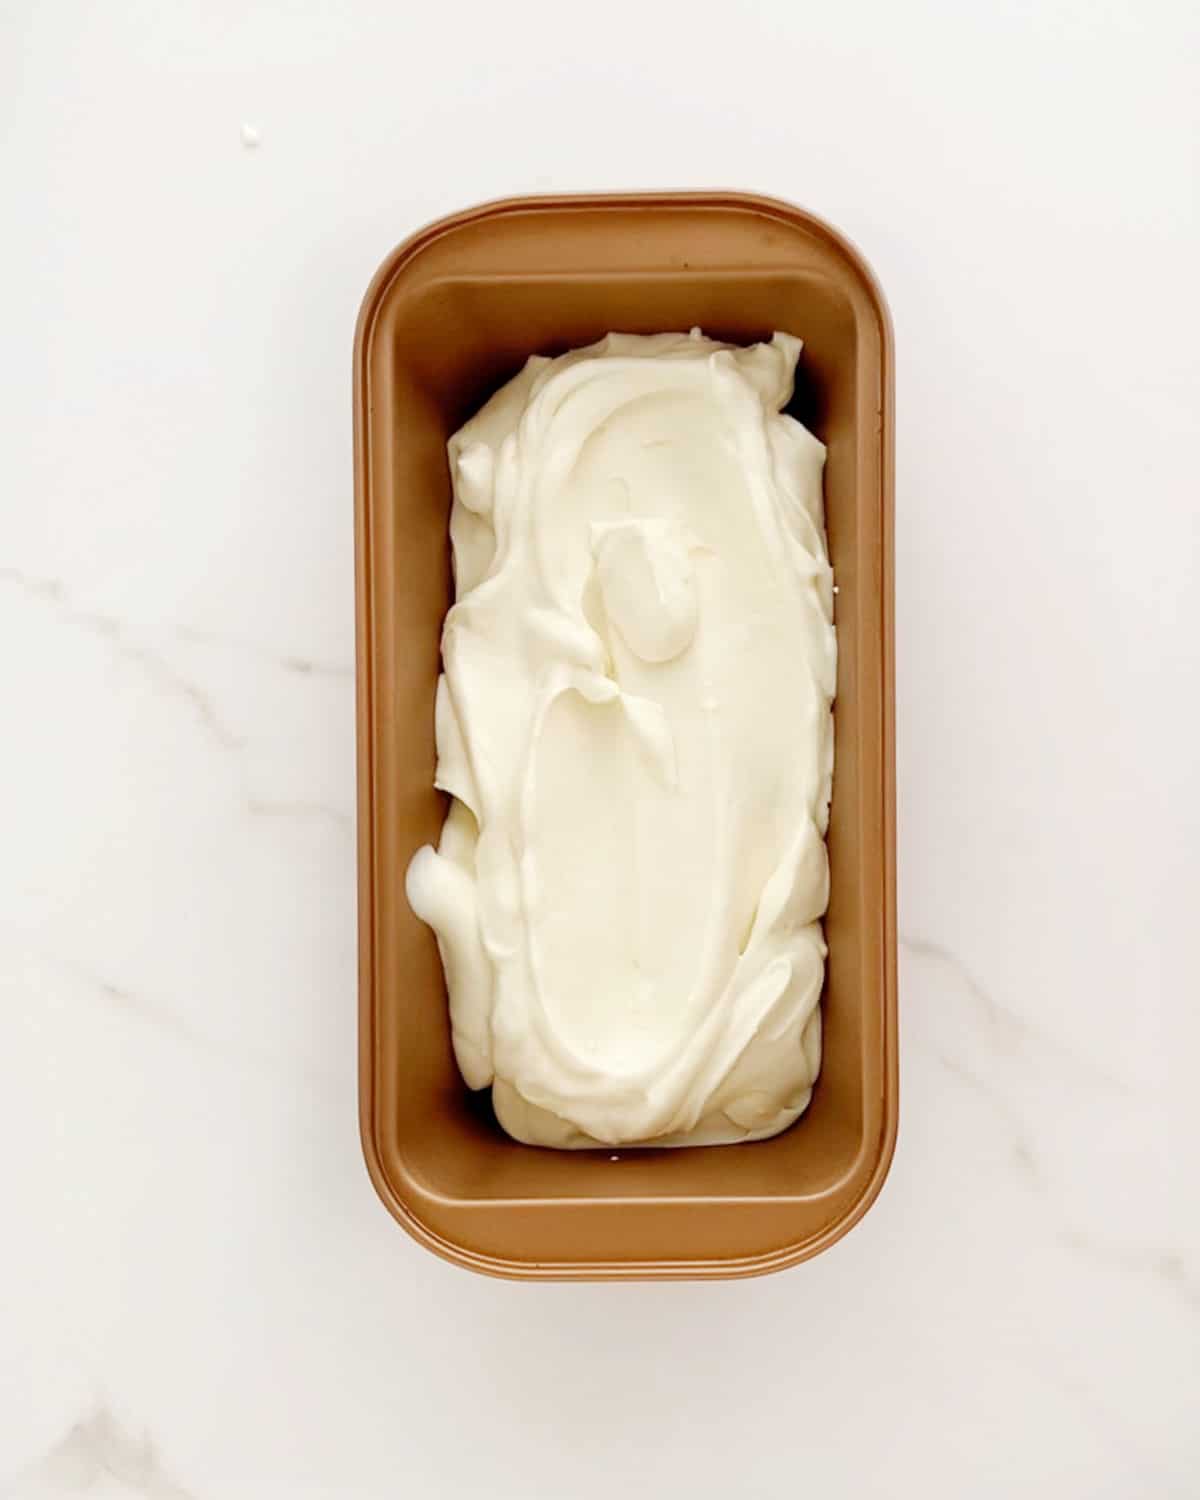 Lemon ice cream in a copper loaf pan on a white marble surface.